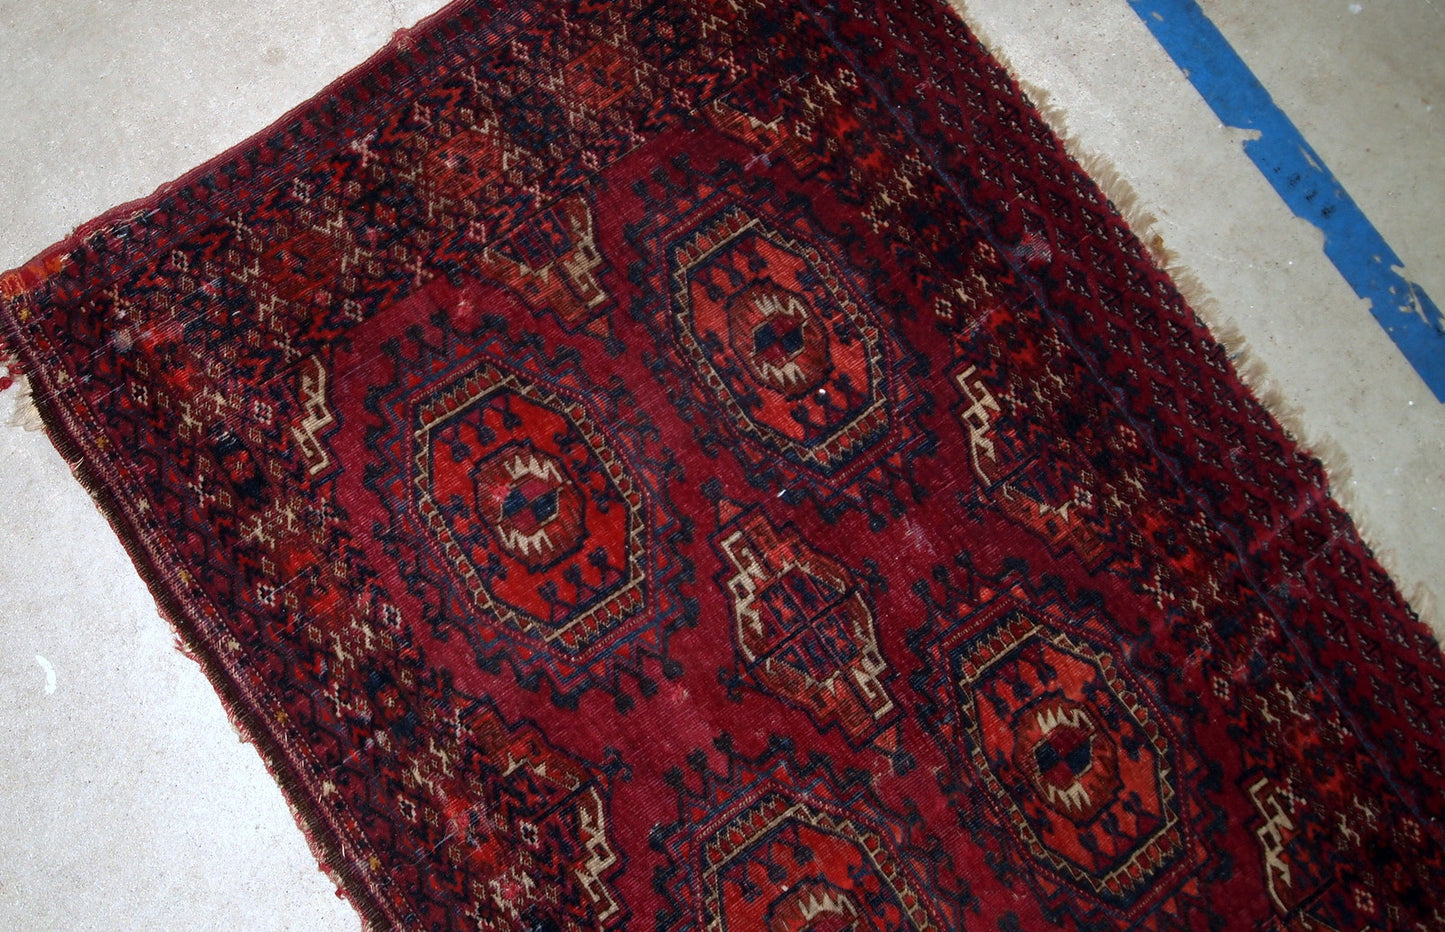 Handmade antique collectible Turkmen Saryk rug in scarlet shade. The rug is from the end of 19th century in original condition, it has some low pile and age wear.